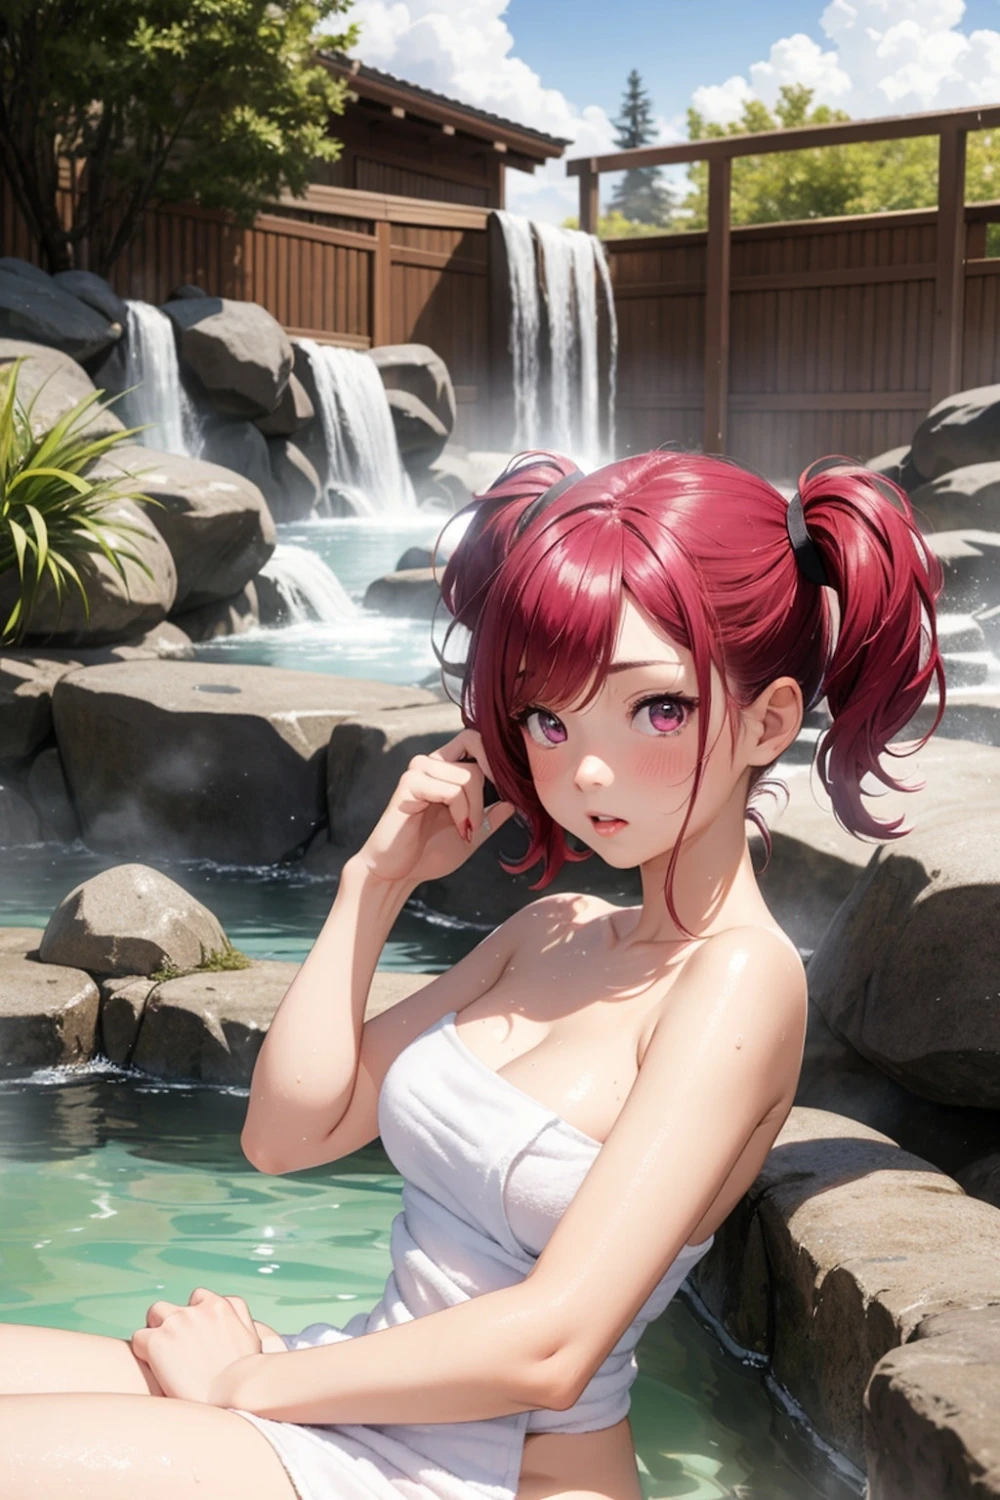 onsen-anime-style-all-ages-31